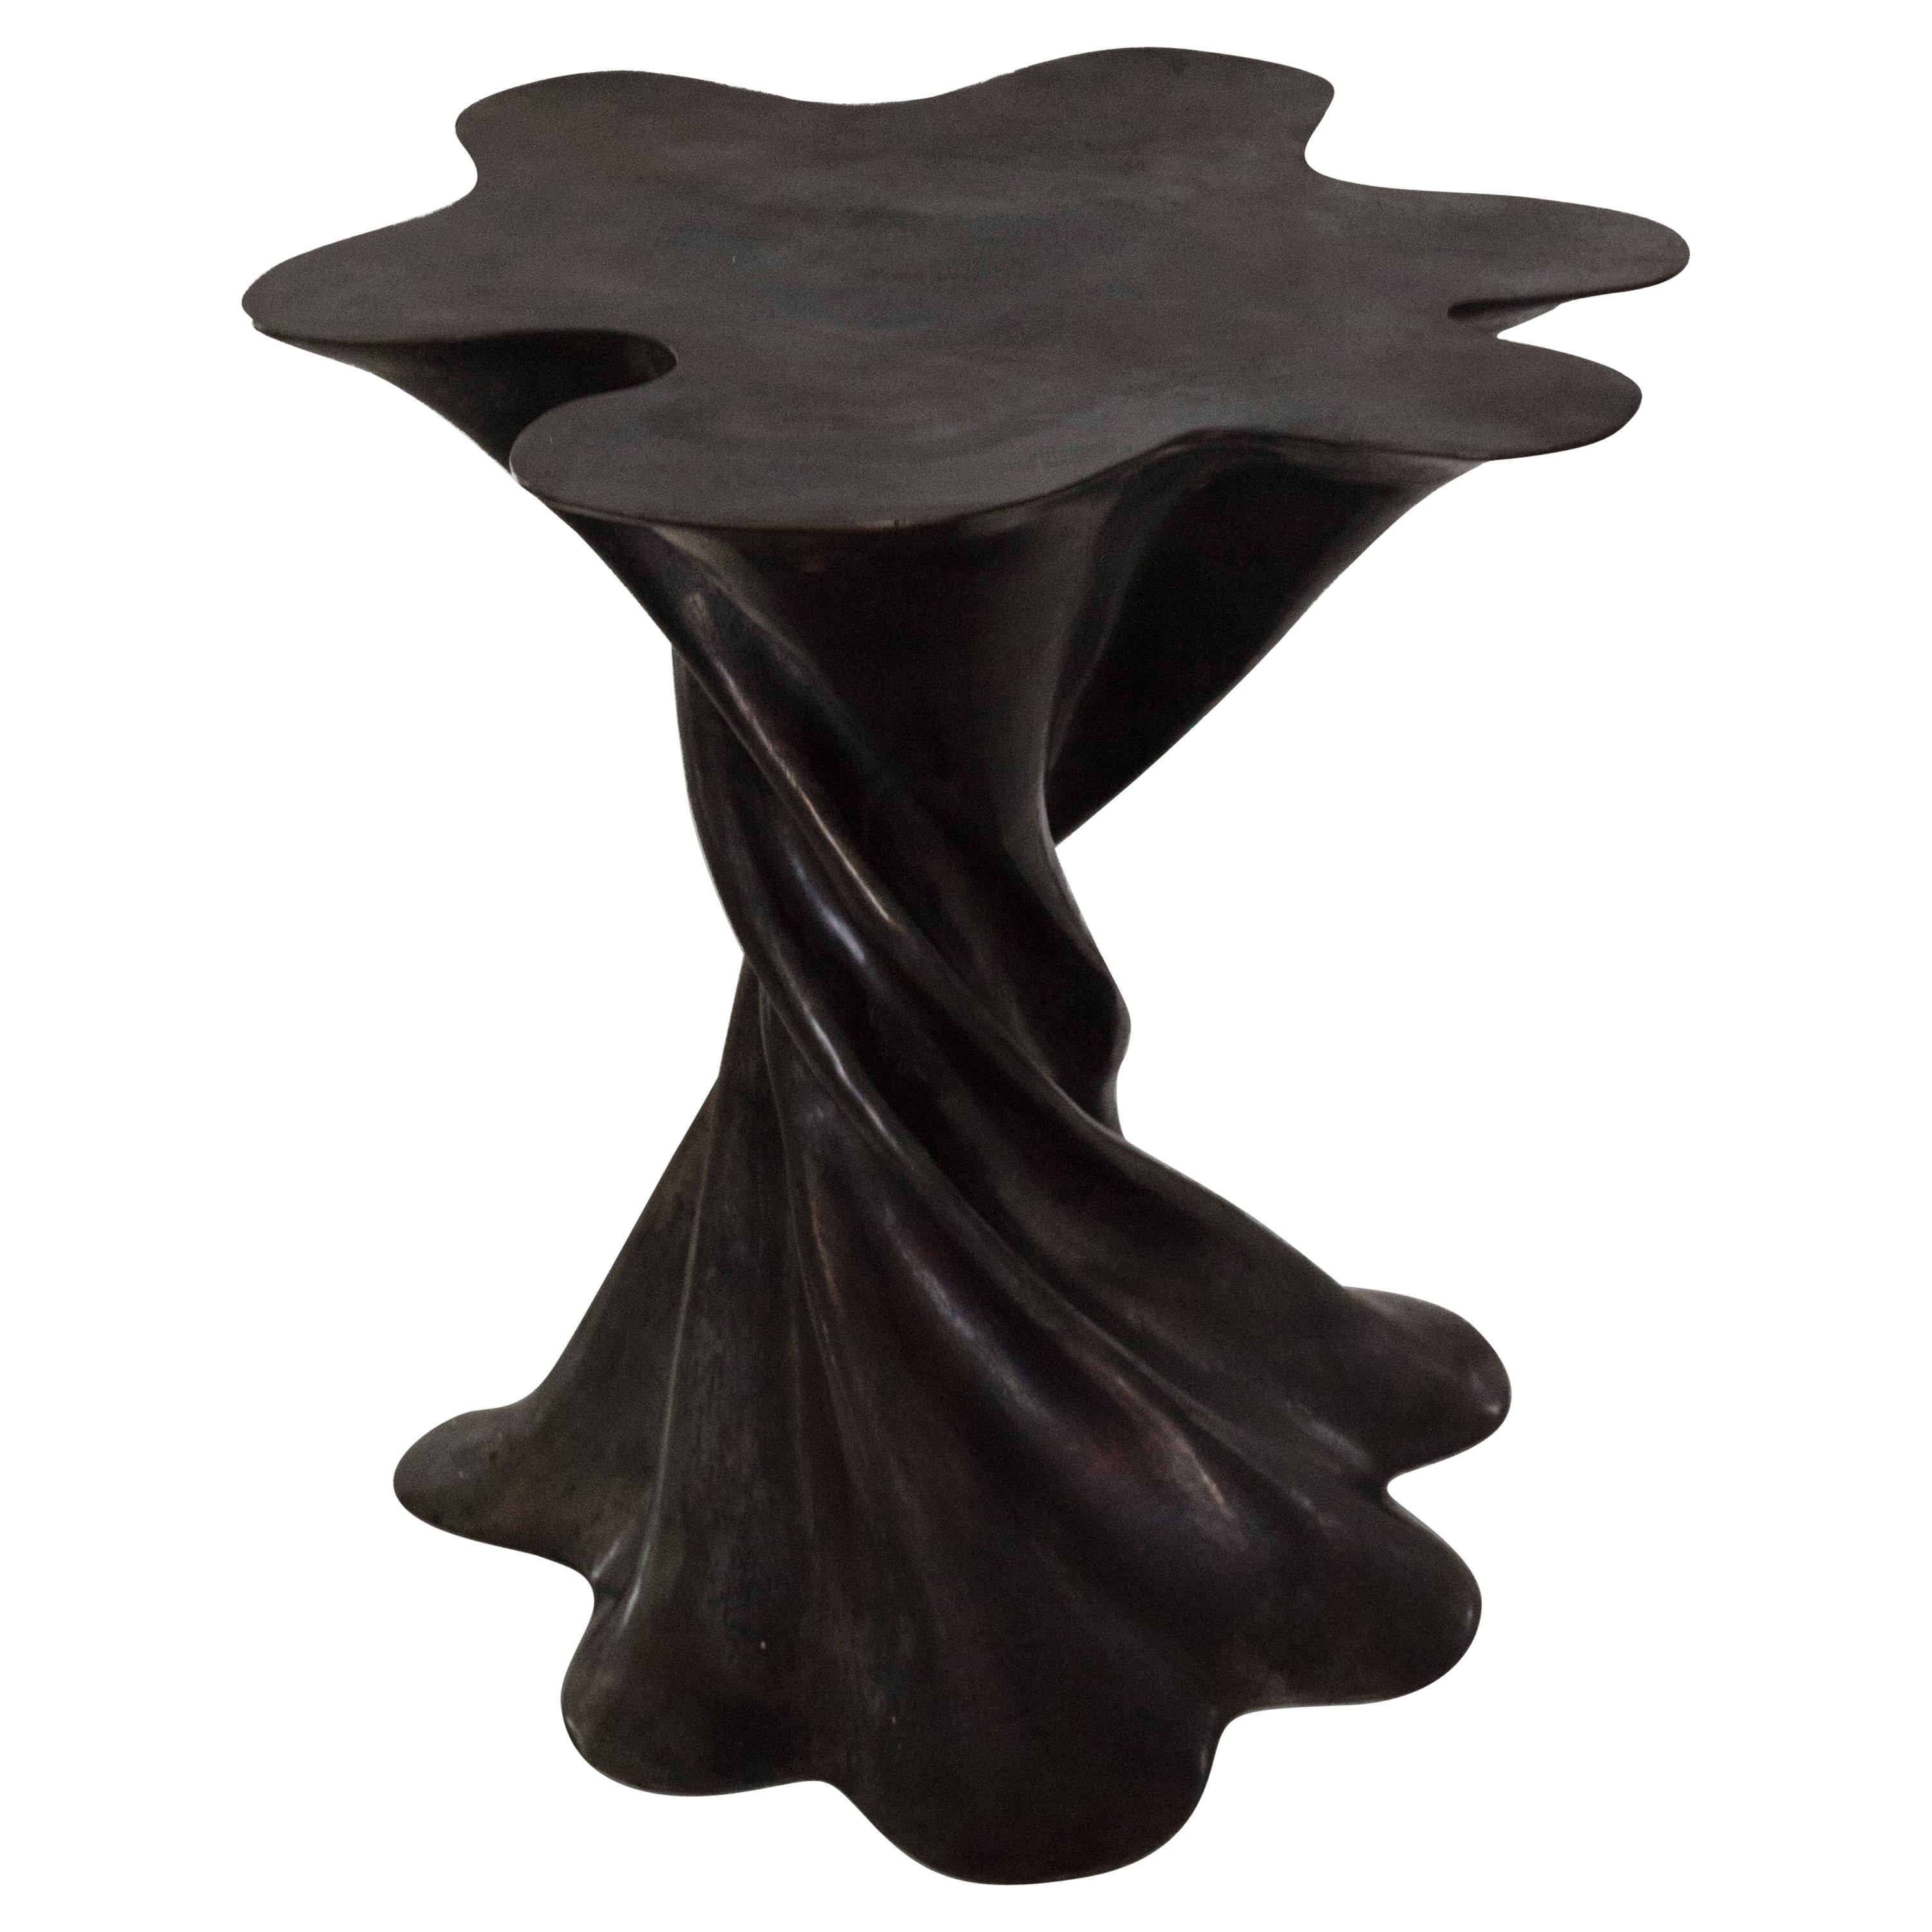 Waltz Table in Dark Patina Handcrafted in India by Stephanie Odegard